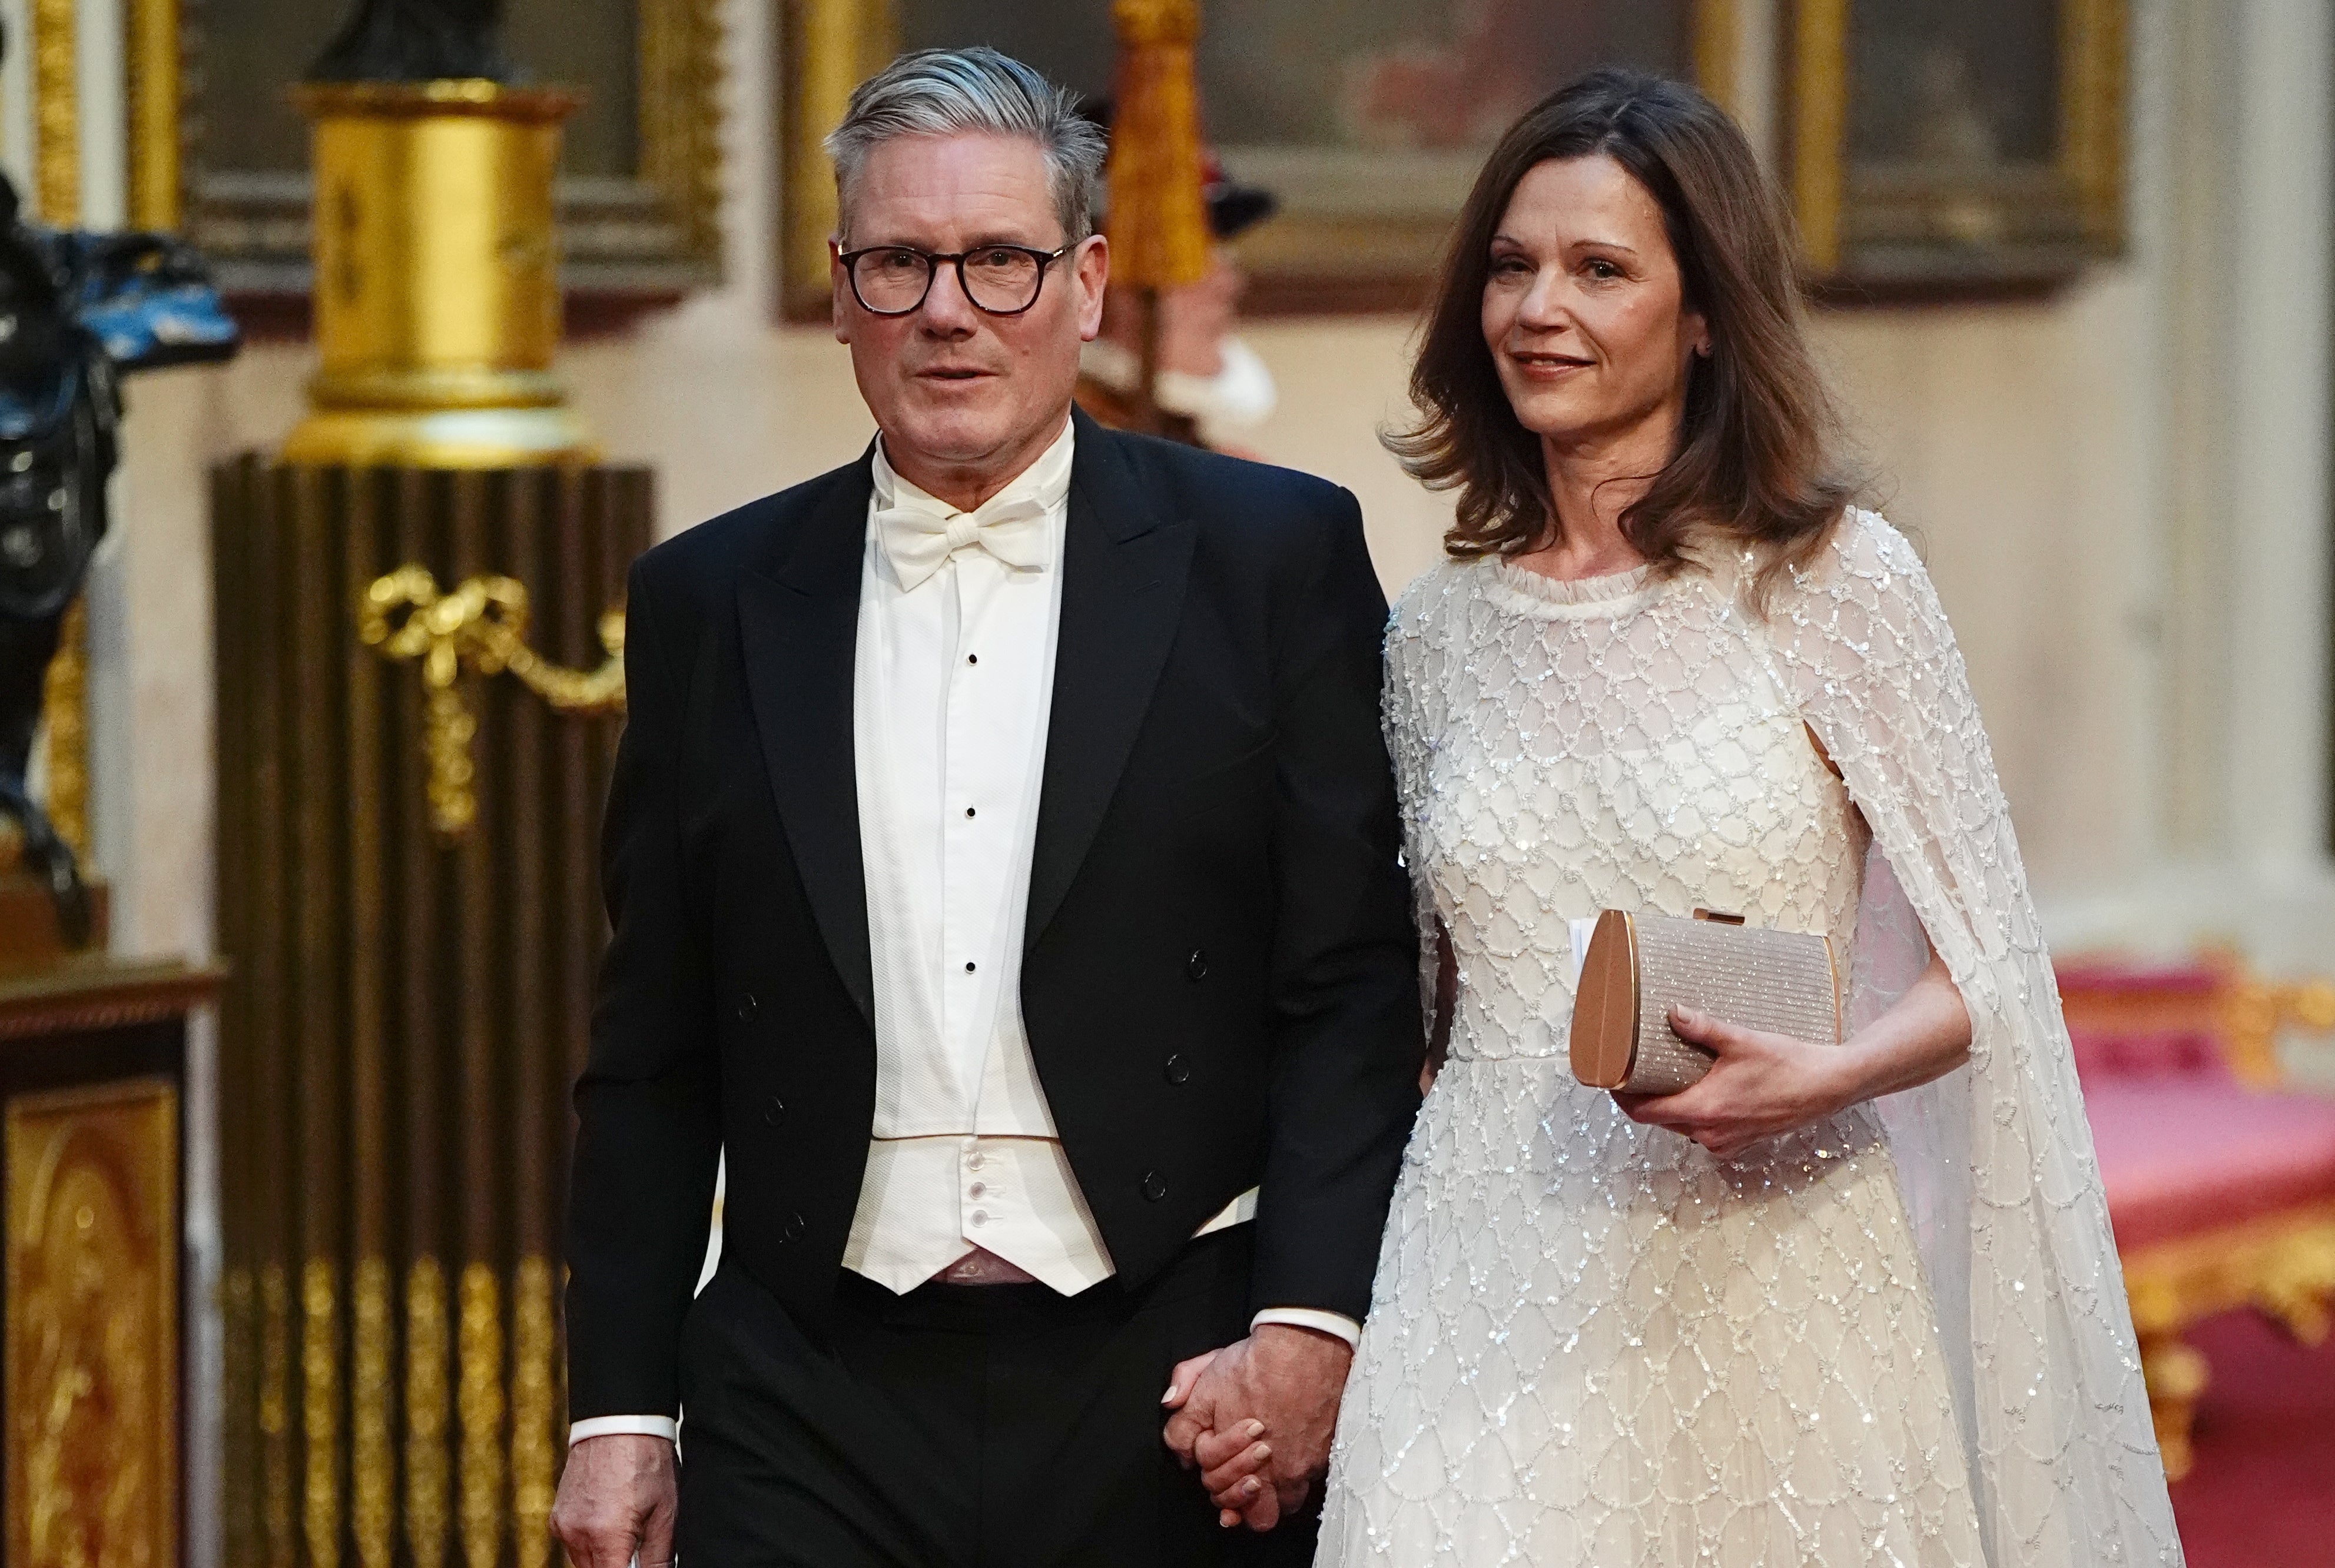 Keir Starmer with his wife Victoria, who is Jewish